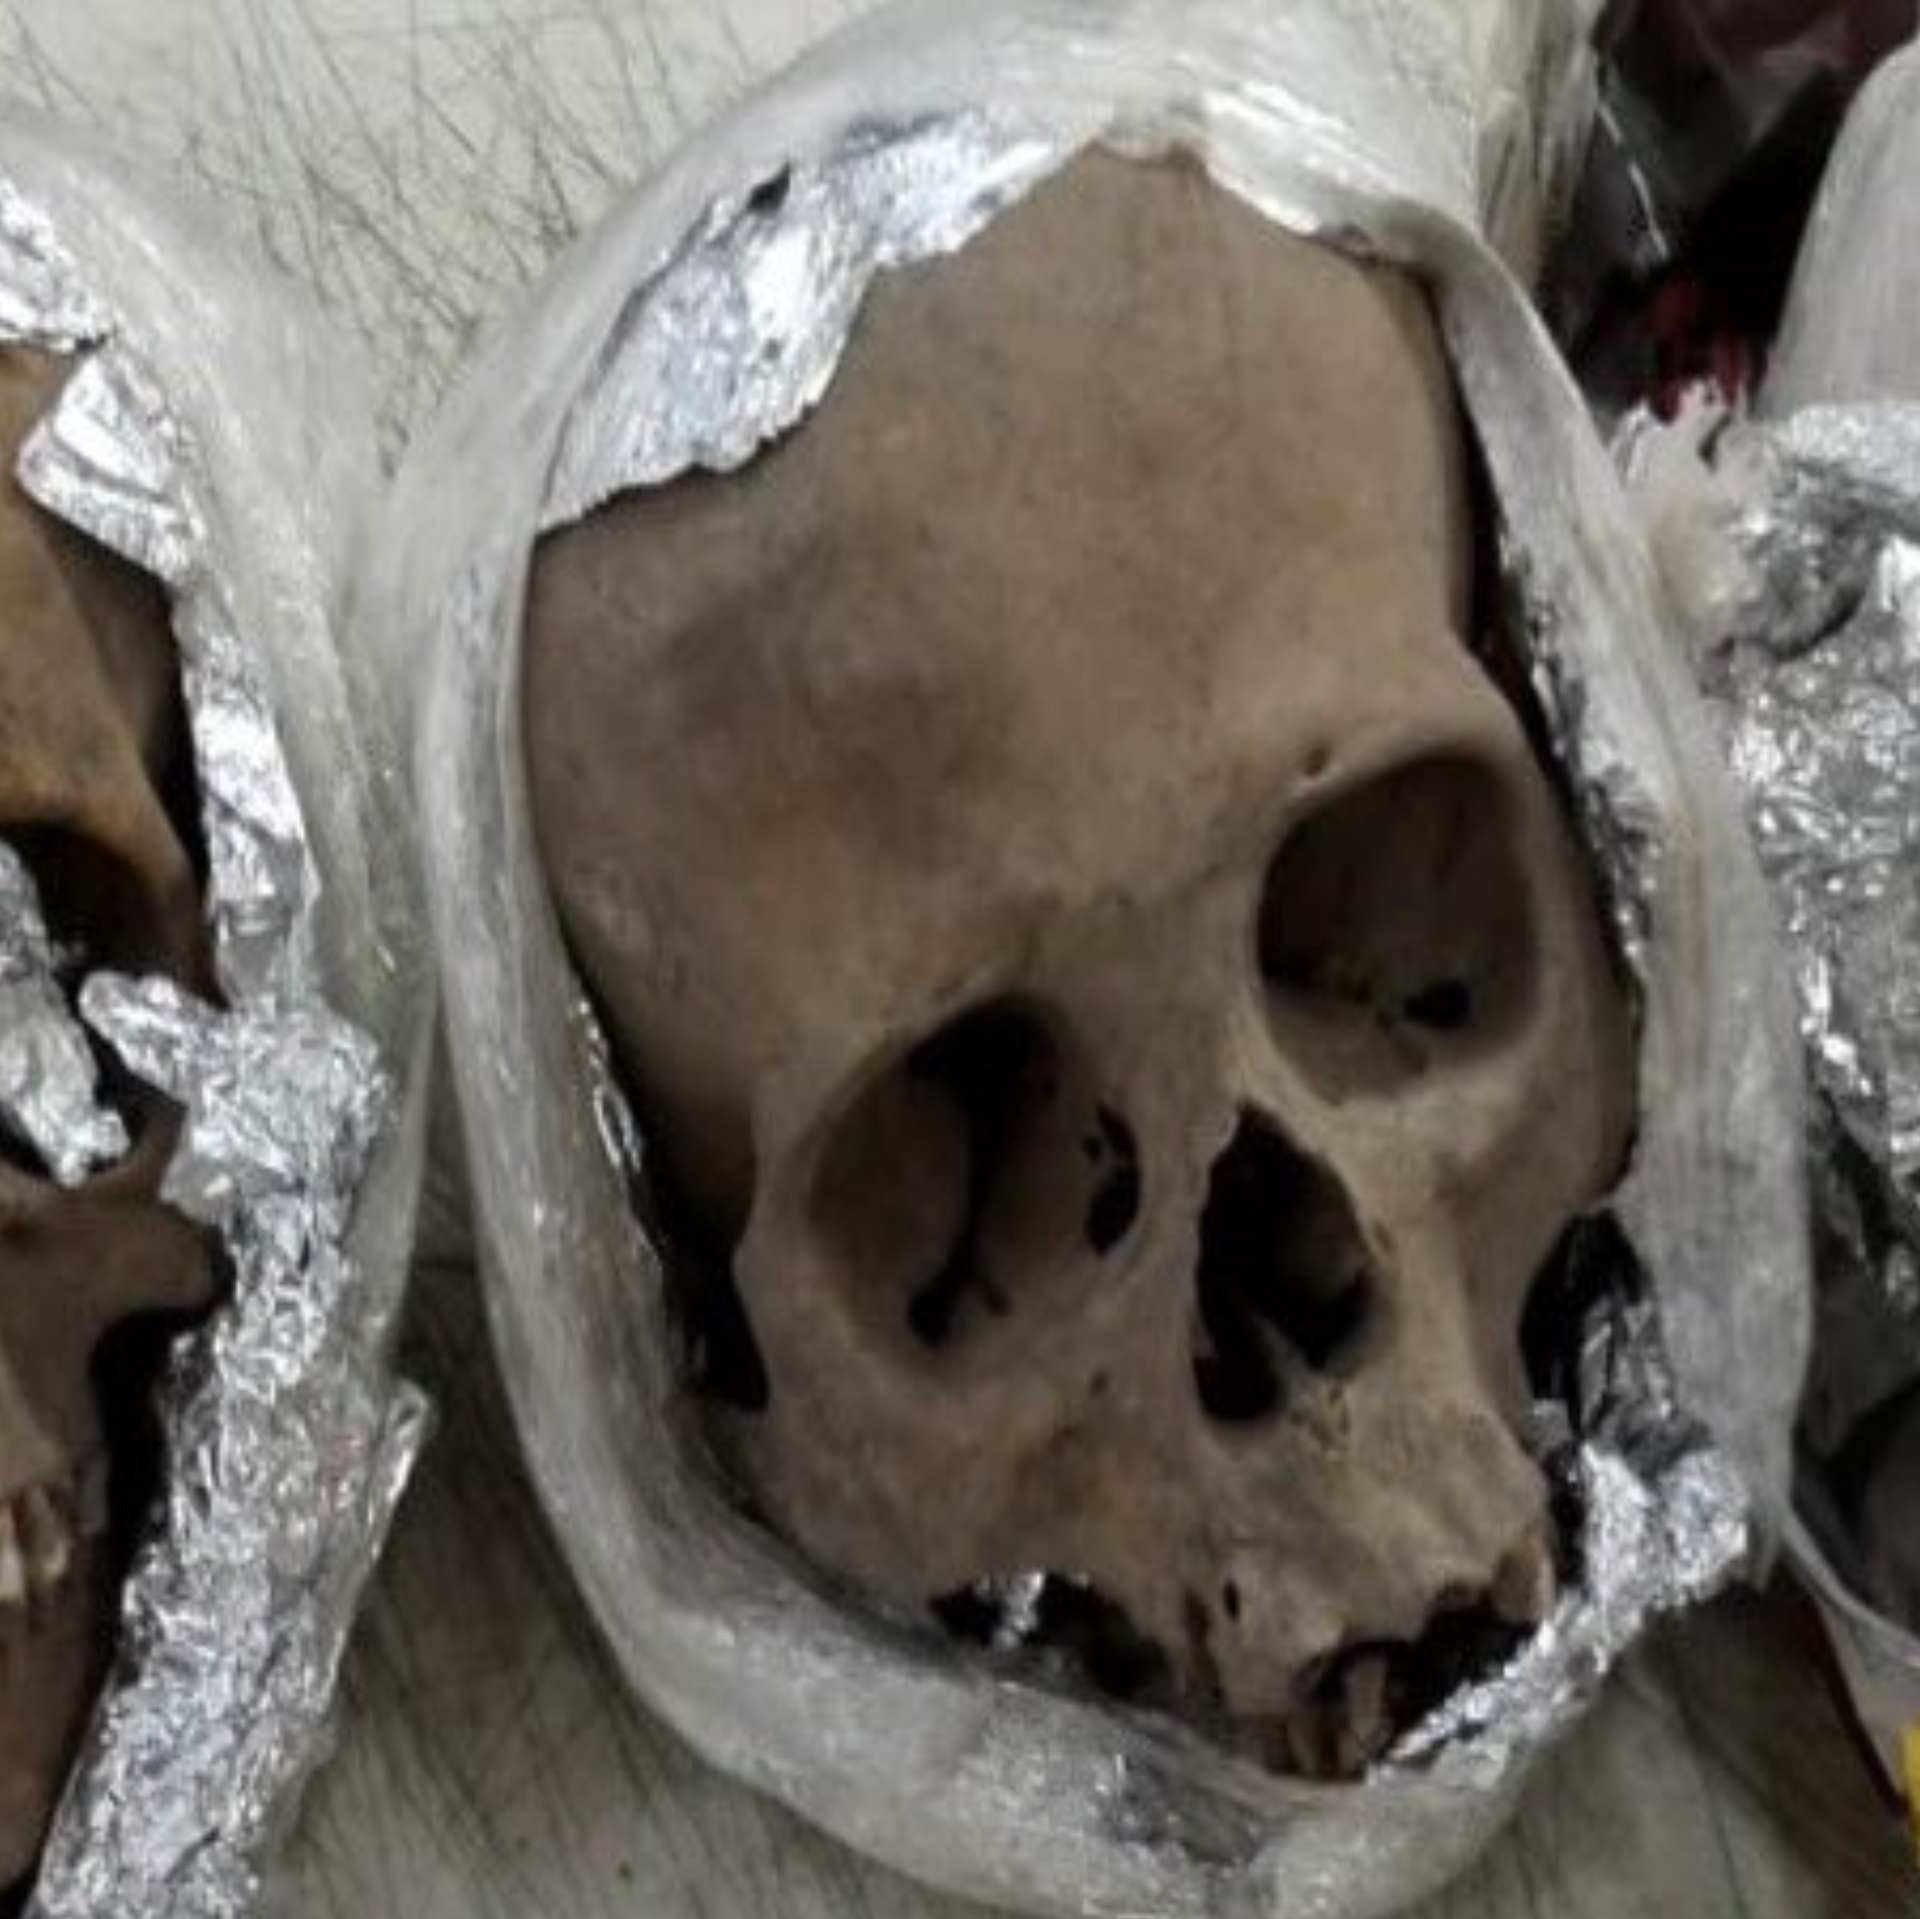 Four human skulls discovered in a crate at a Mexican airport traveling to the US